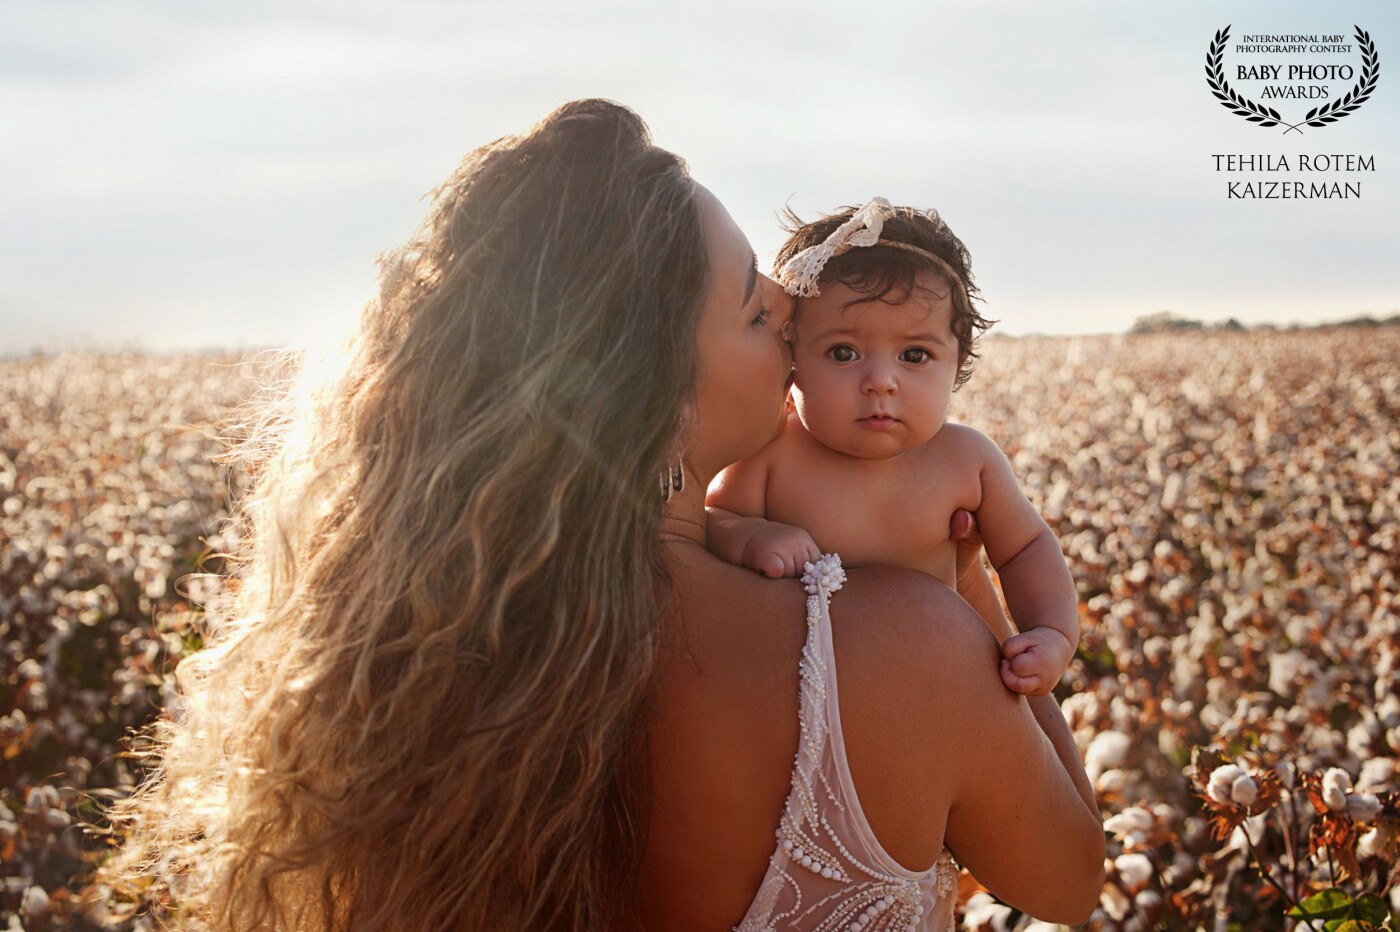 This beautiful girl name is Lenny .<br />
This pic taken in Israel <br />
I love this image because  you can feel the mom love to her child <br />
❤️???